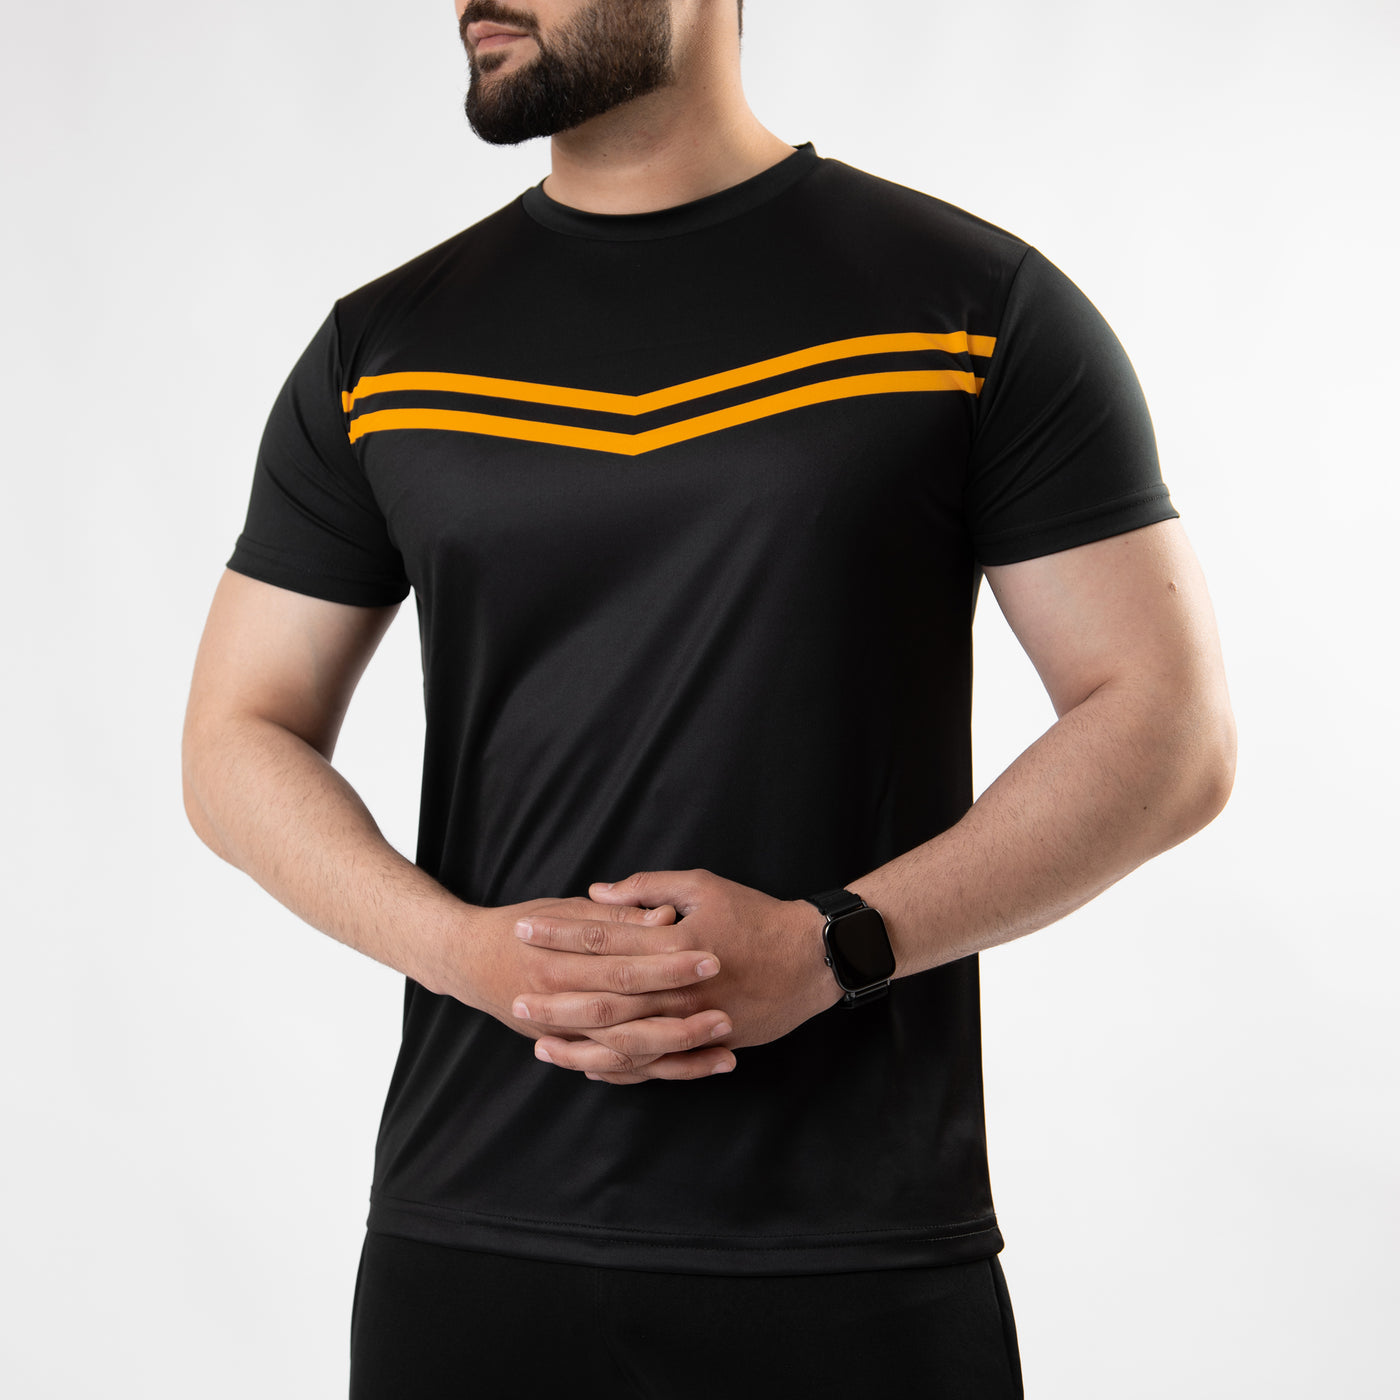 Premium Black Sublimated Quick Dry T-Shirt with Front Yellow Stripes